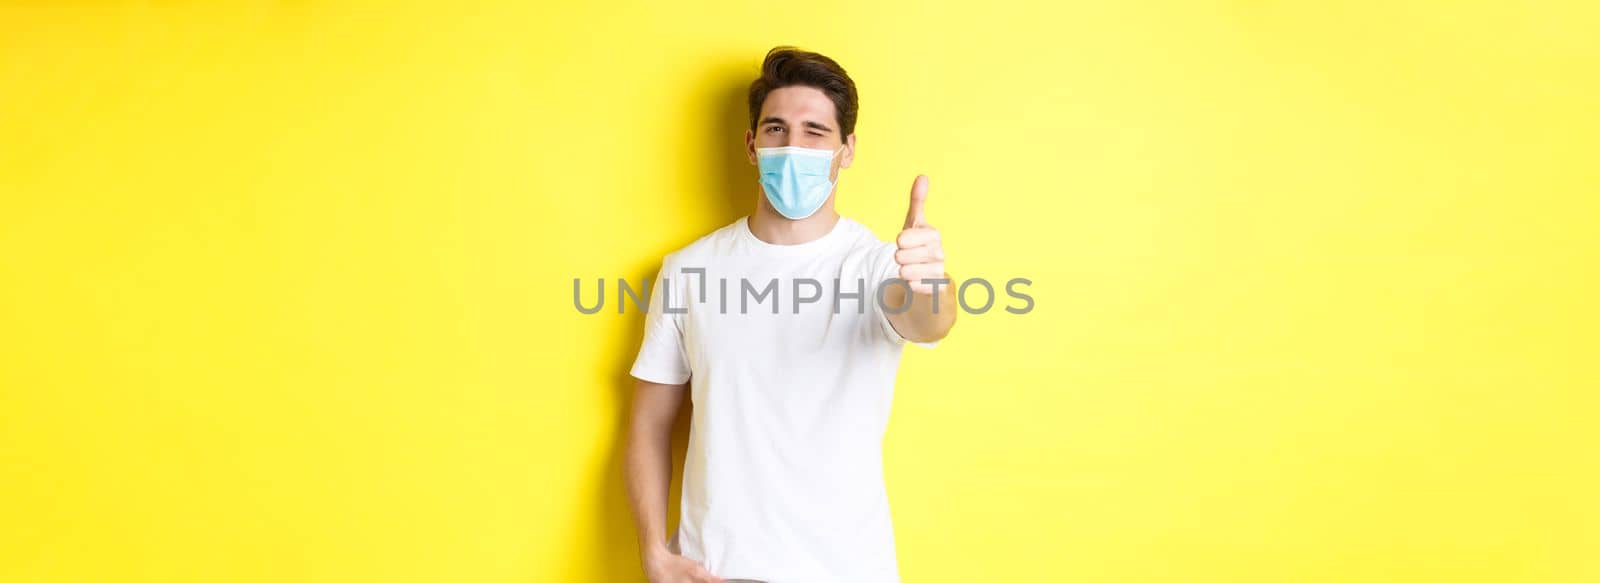 Concept of coronavirus, pandemic and social distancing. Confident young man in medical mask showing thumbs up and winking, yellow background.